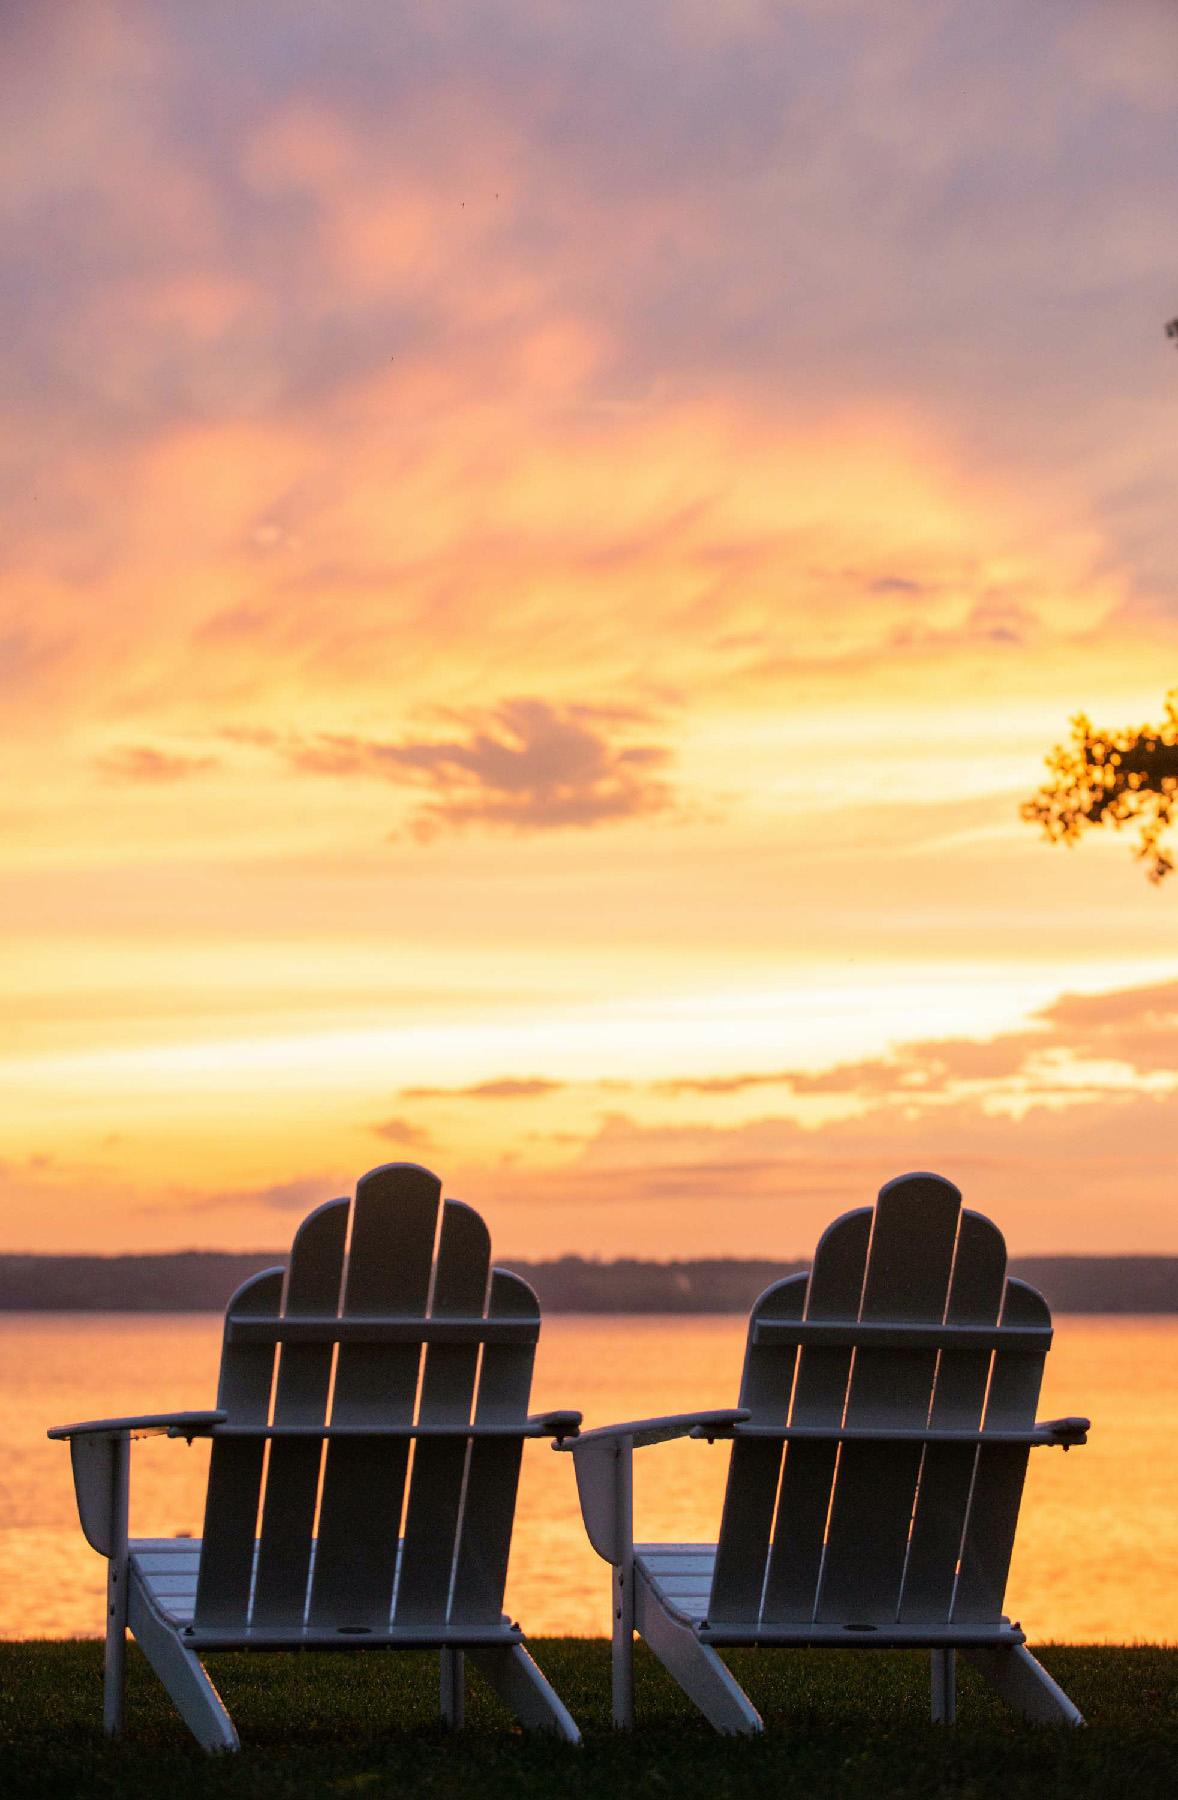 Adirondack chairs overlooking Cayuga Lake in the Finger Lakes region of New York, provide the perfect end to a day of exploring the area. (Photo courtesy of Inns of Aurora.)